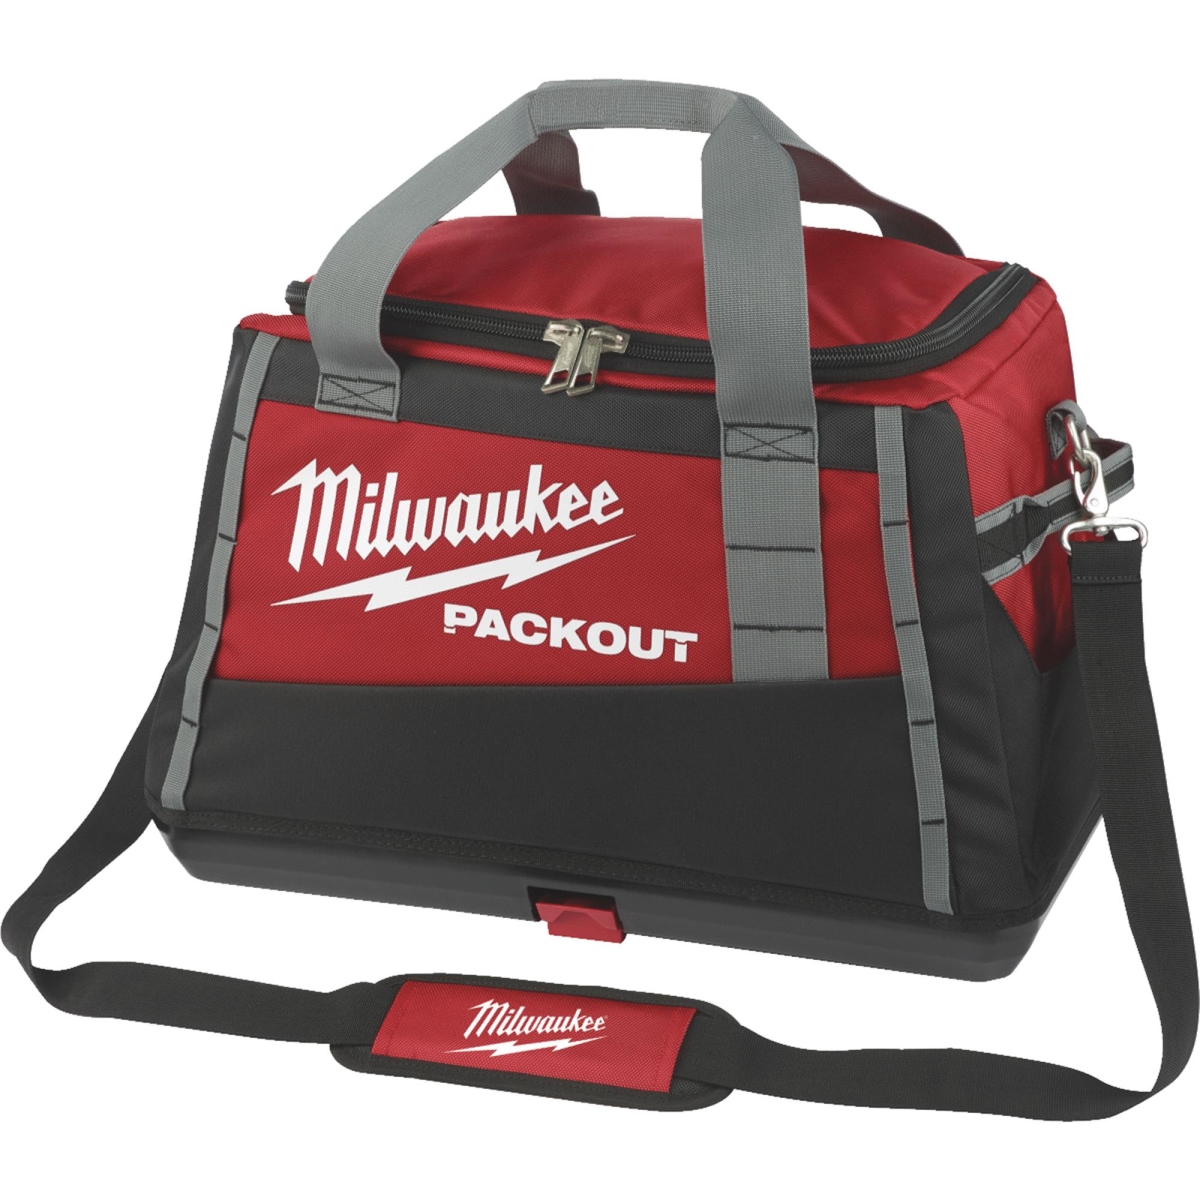 251907 20 In. Packout Tool Bag